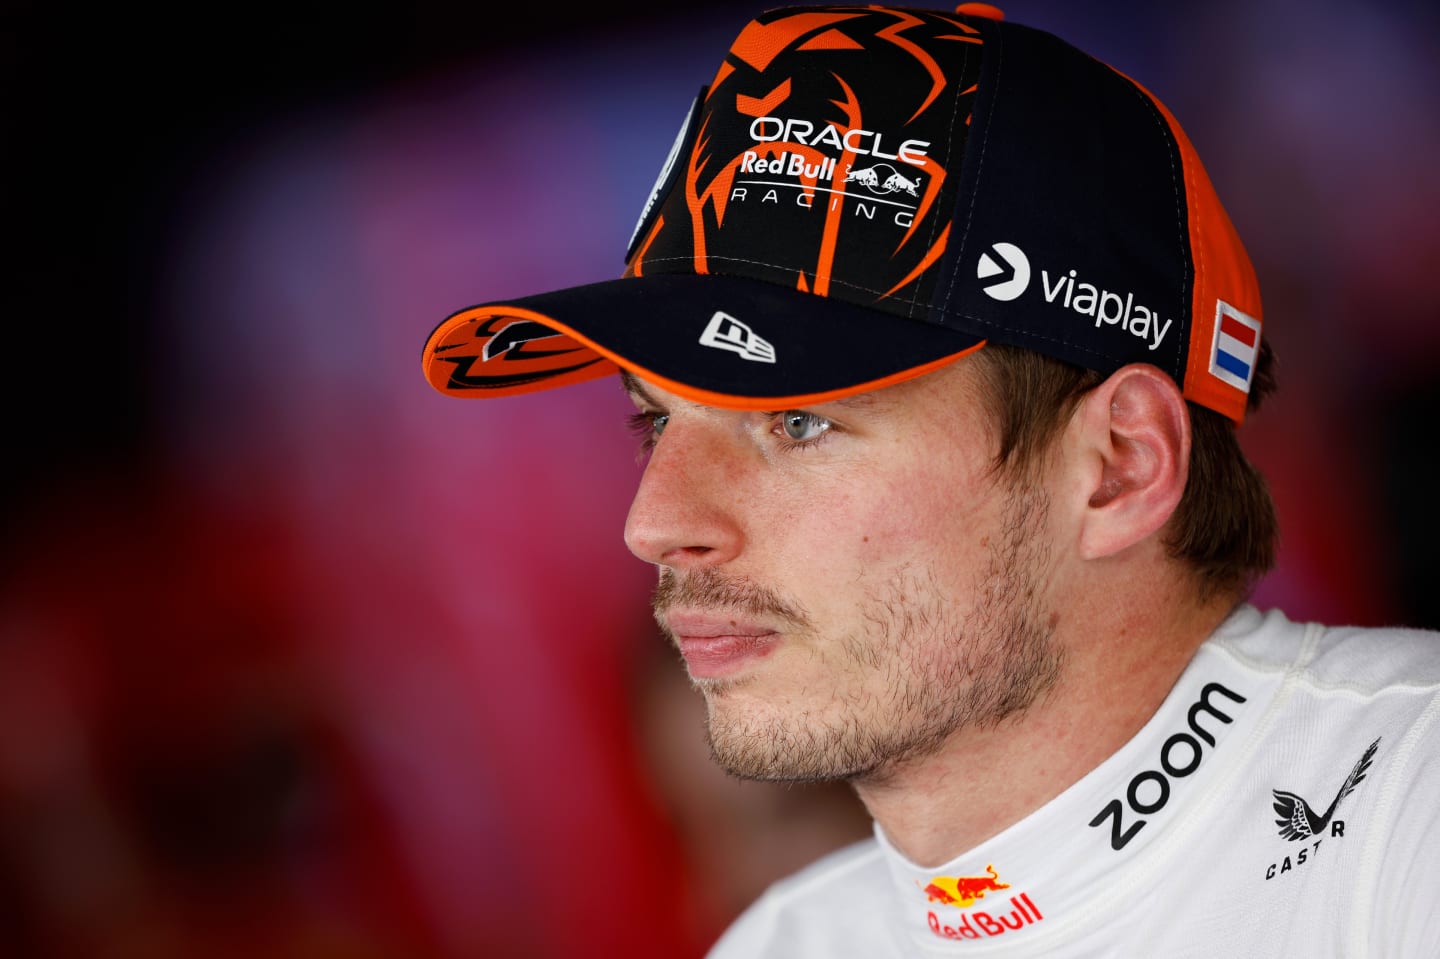 SPIELBERG, AUSTRIA - JUNE 30: 5th placed Max Verstappen of the Netherlands and Oracle Red Bull